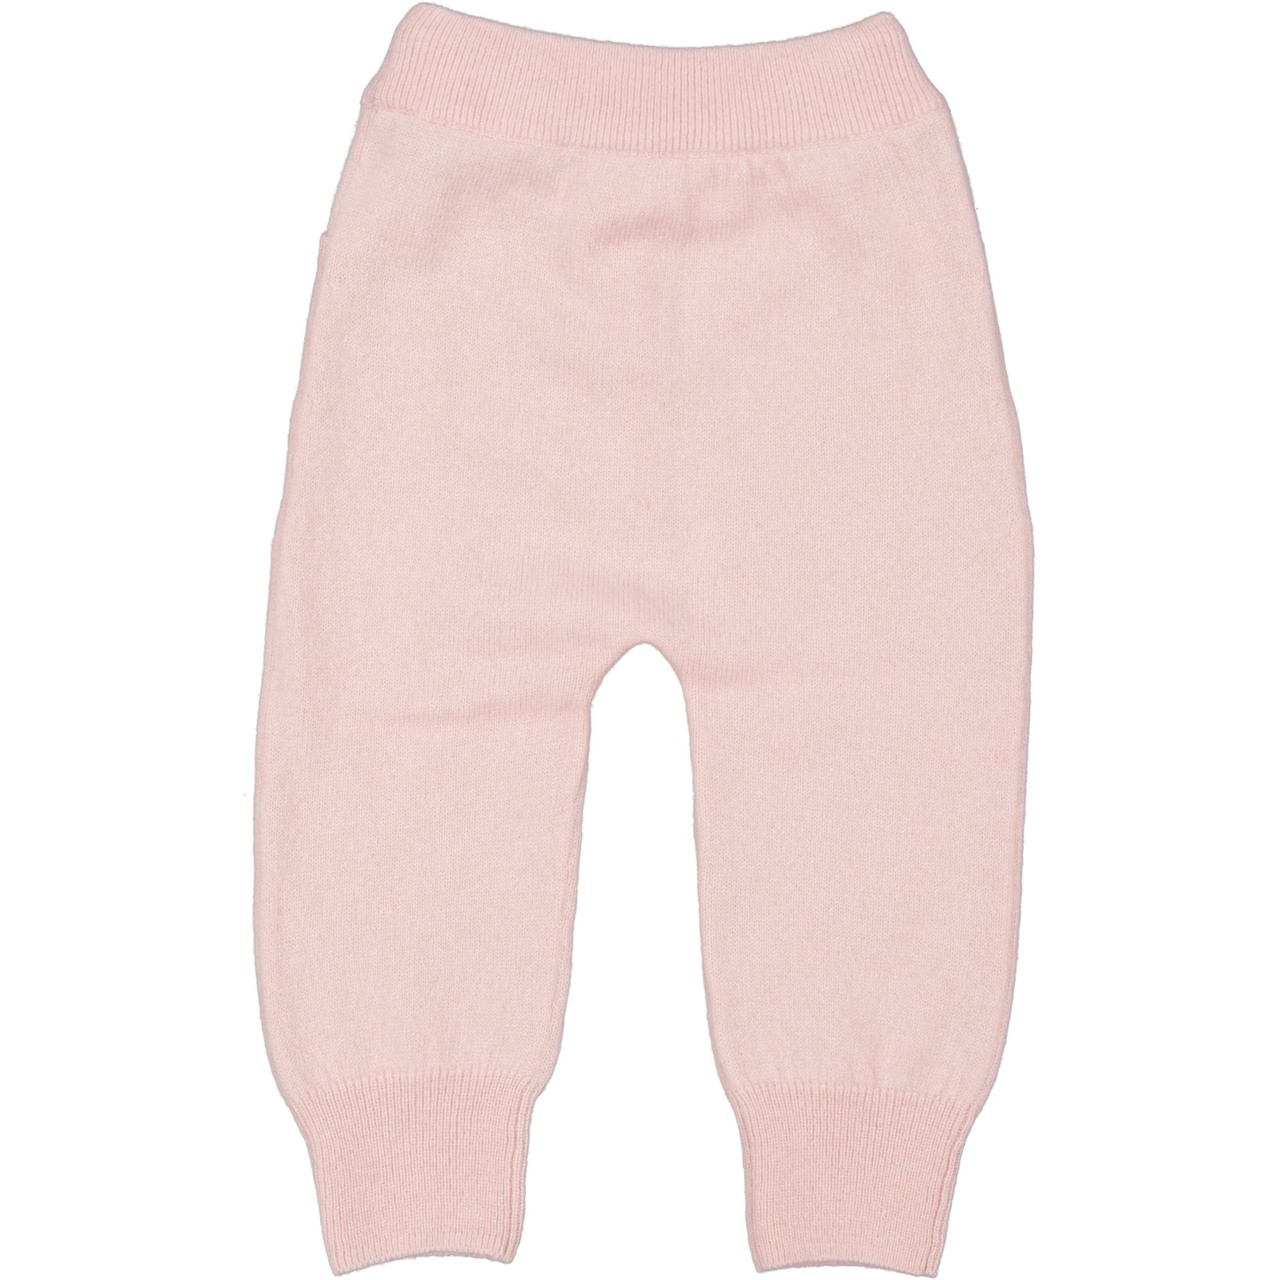 Cashmere trouser - Pink 50/56